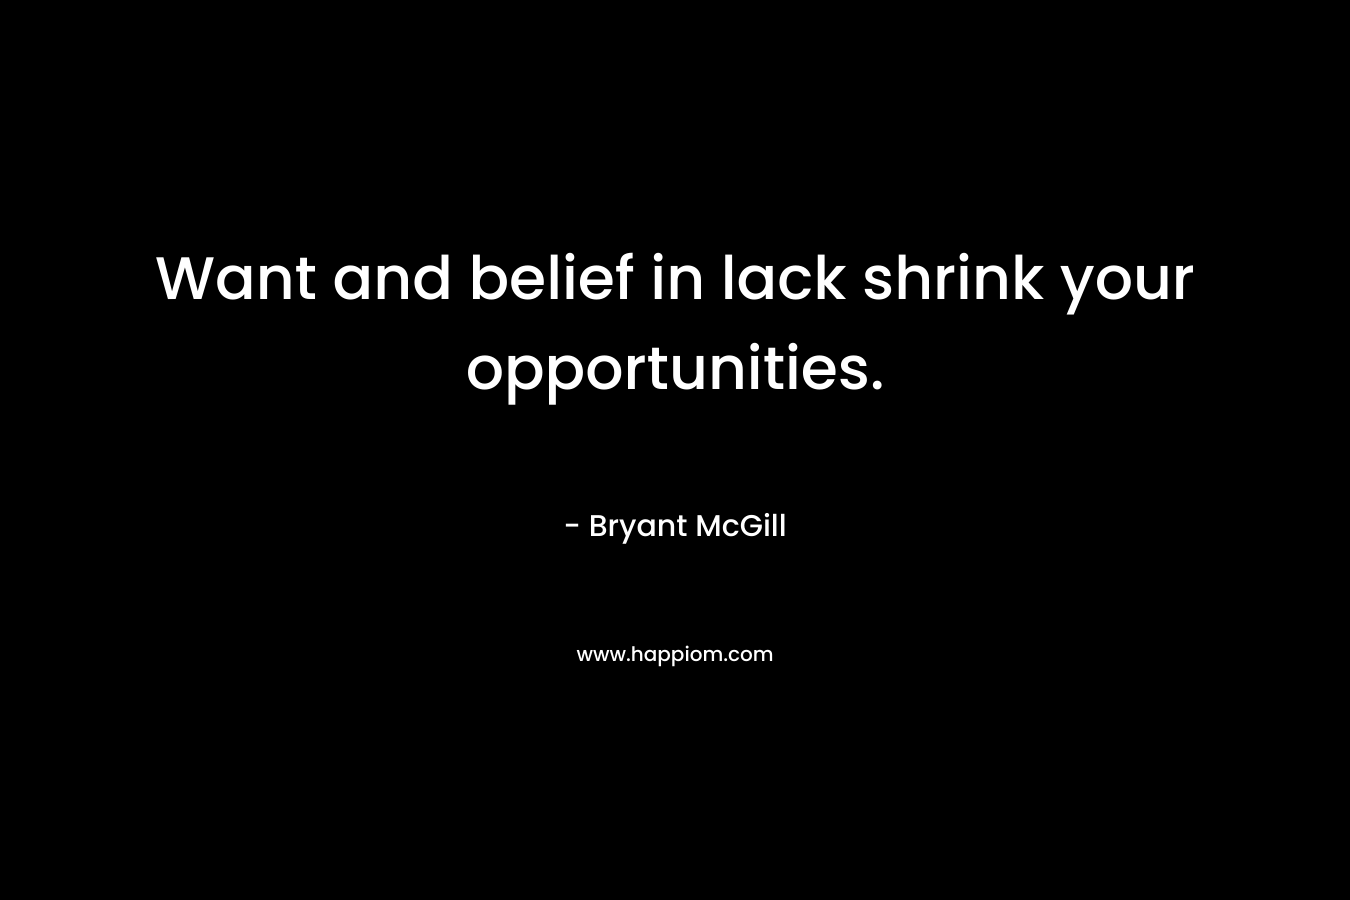 Want and belief in lack shrink your opportunities. – Bryant McGill